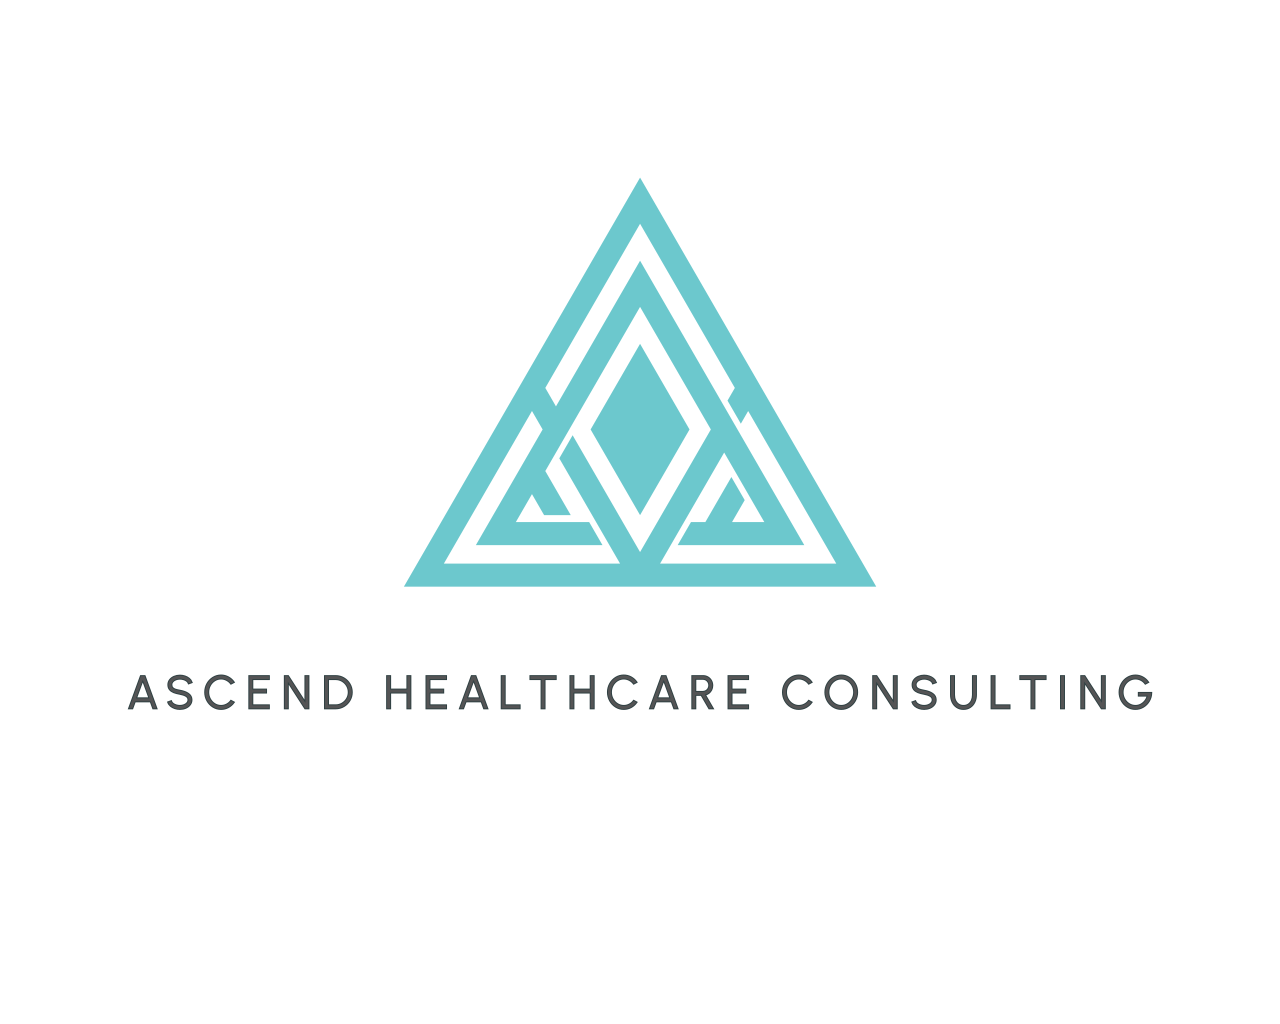 Ascend Healthcare Consulting